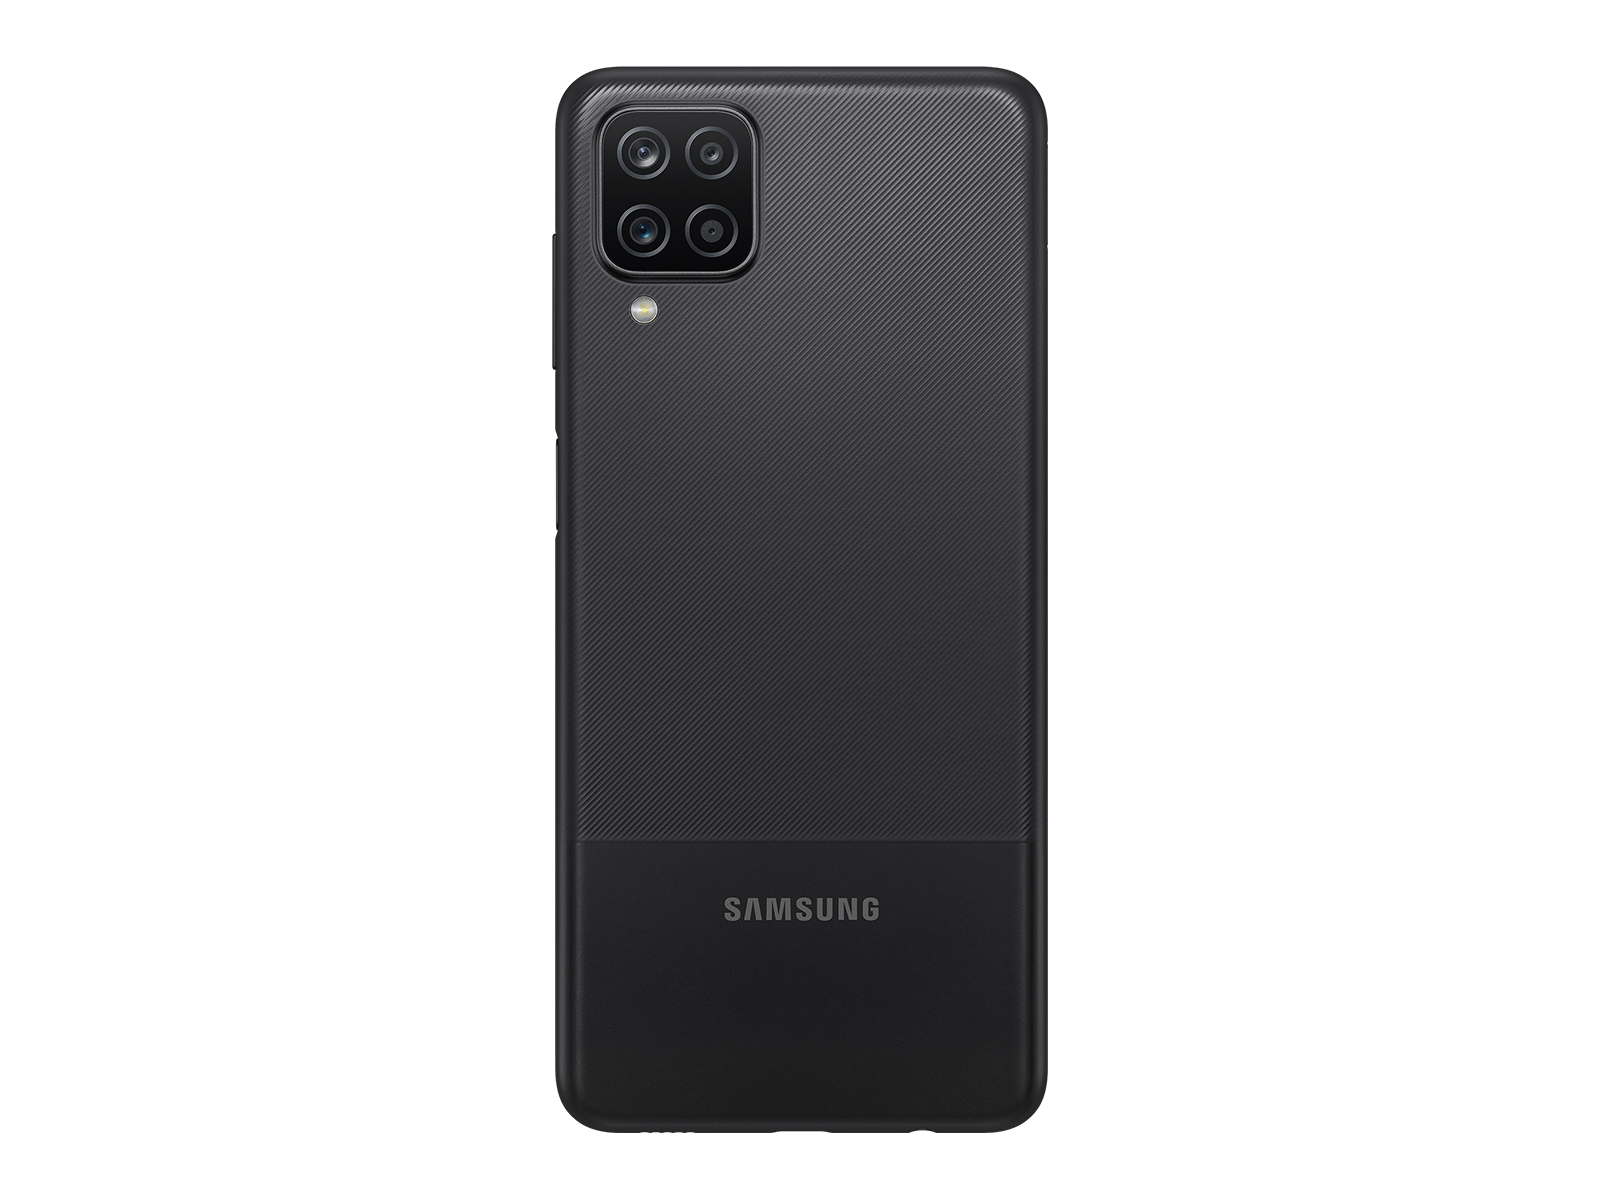 Thumbnail image of Galaxy A12 (Metro by T-Mobile)